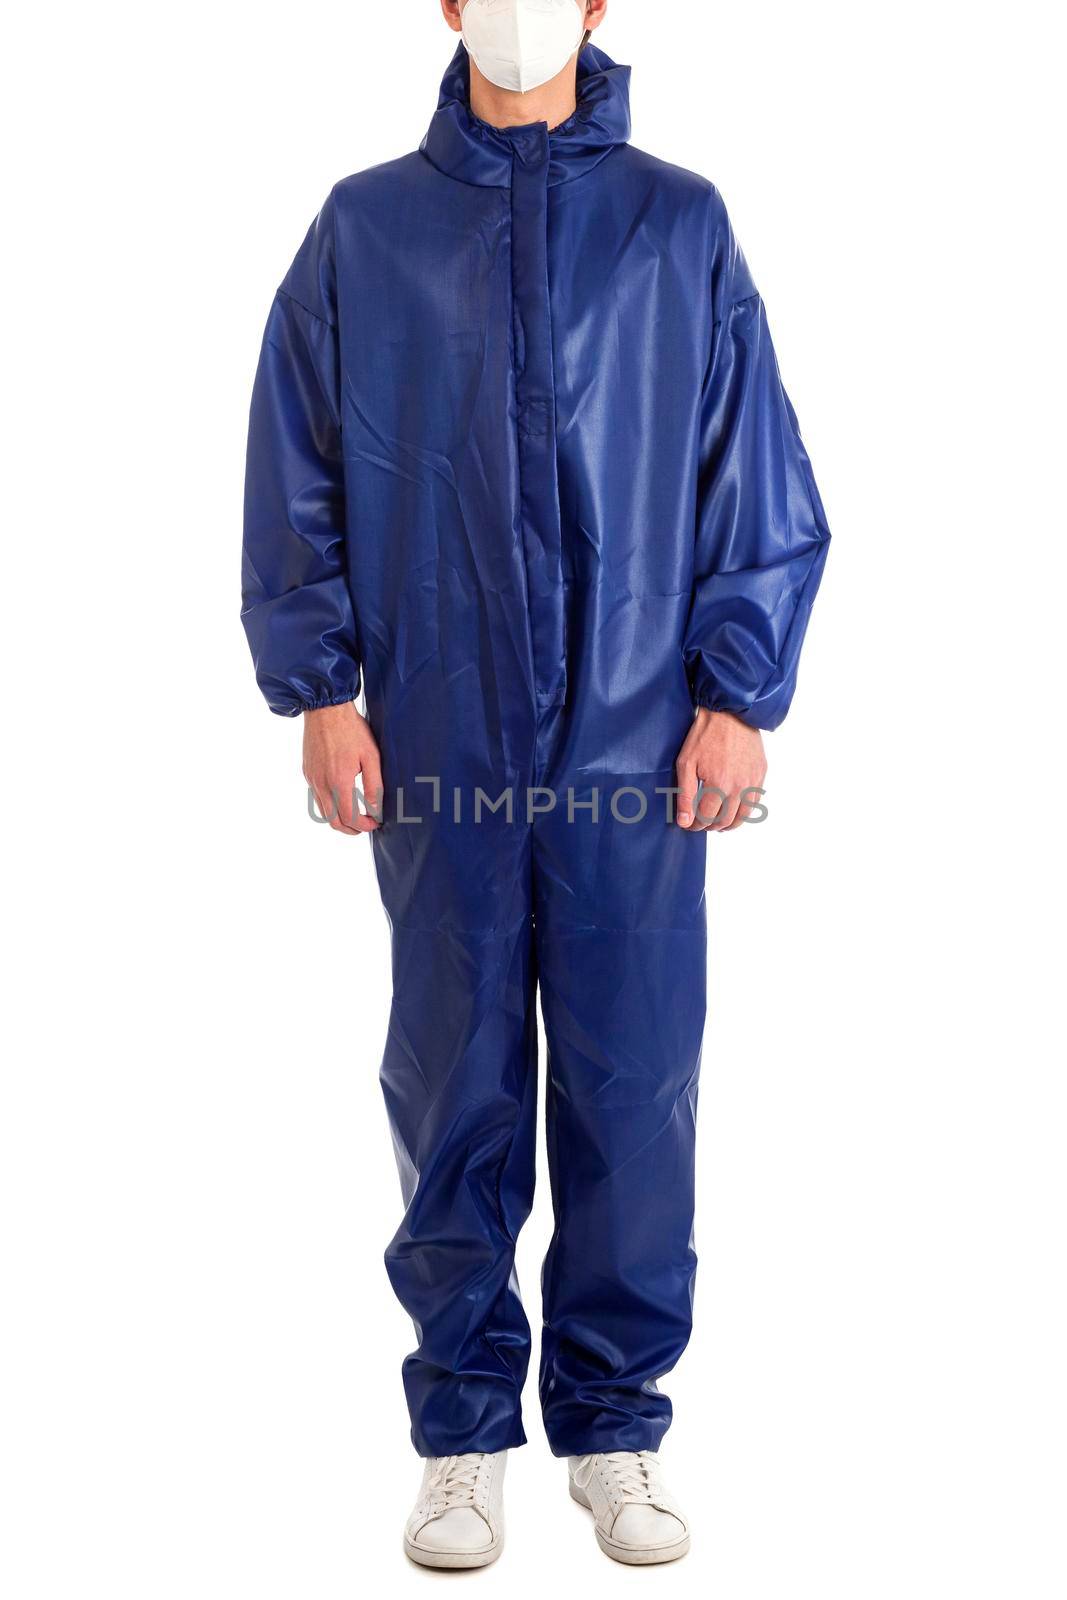 Man wearing blue protective suit and mask isolated on white background by Nobilior